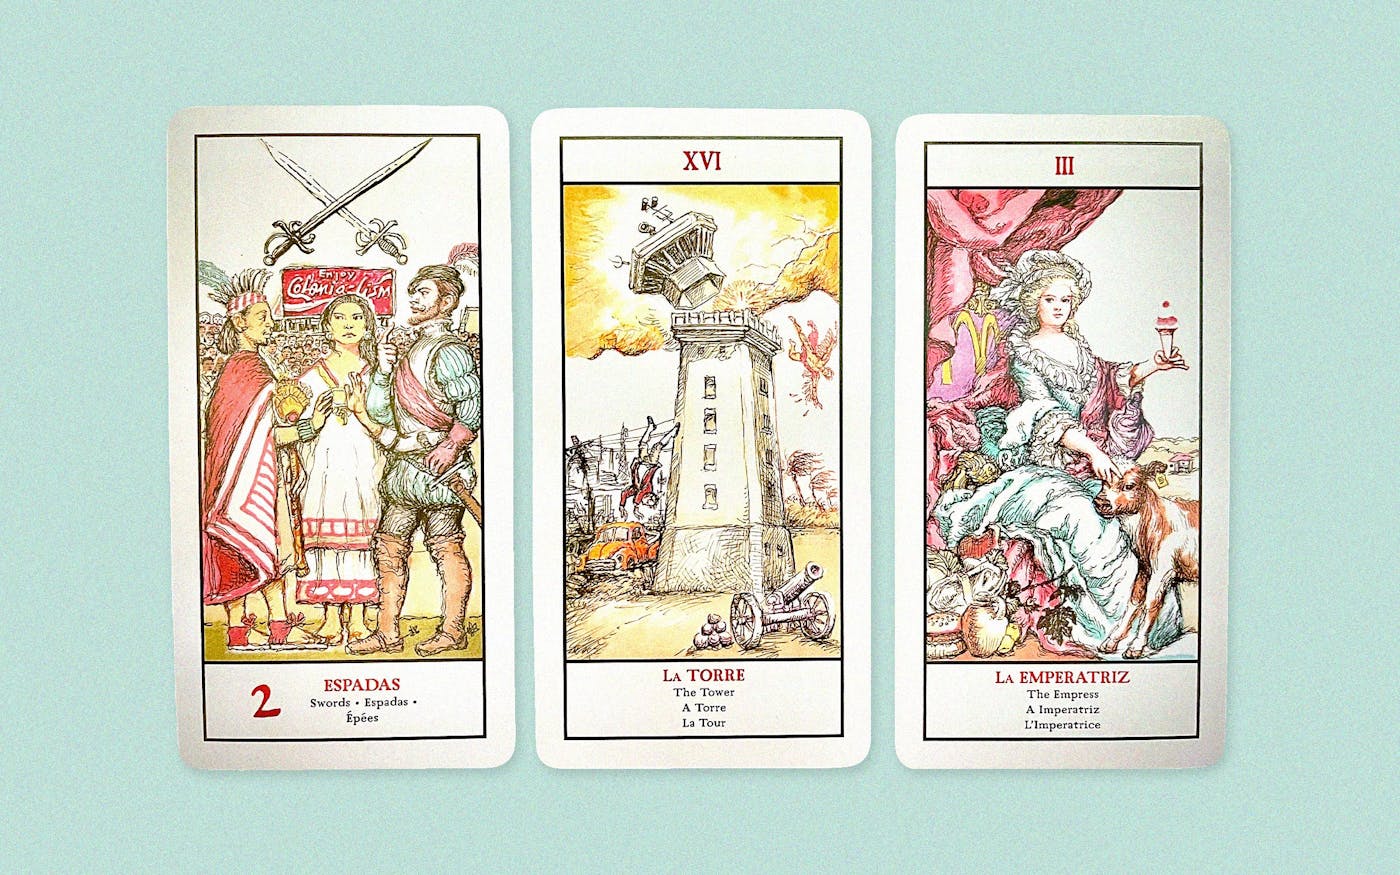 The art of tarot, from the Renaissance to today